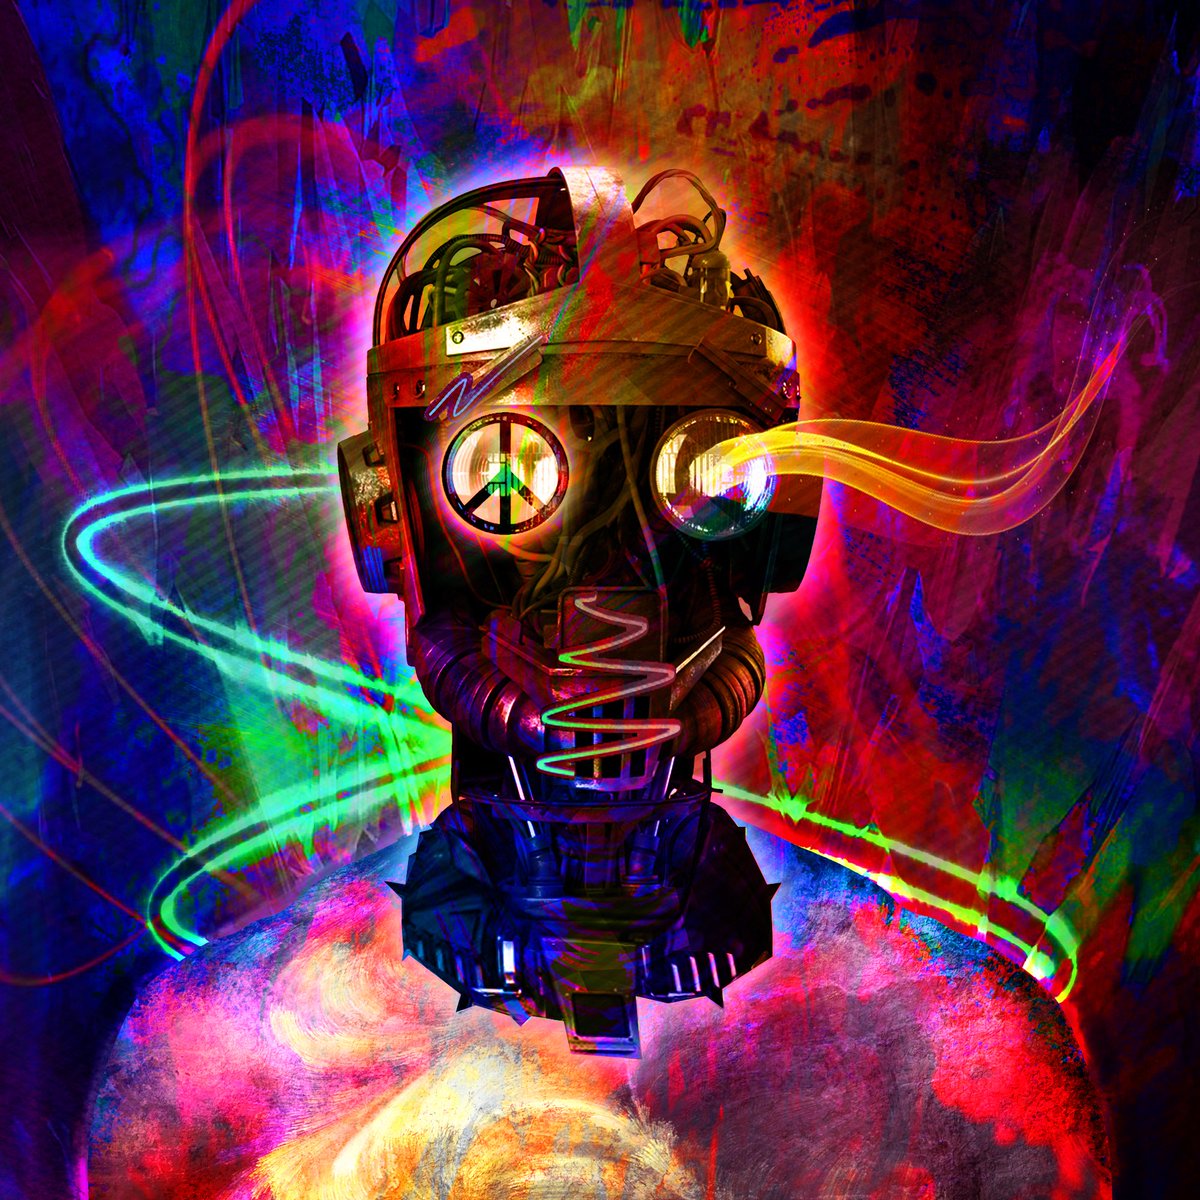 Have just dropped my latest Robozz title Neon Hippie to @opensea This one is on Polygon so No Gas Fees. 

1/1
0.02 $ETH

opensea.io/assets/matic/0…

#nft #crypto #nftart #nftcommunity #nftcollector #opensea  #nfts #industrialart #openseanft #newnft #nftdrop